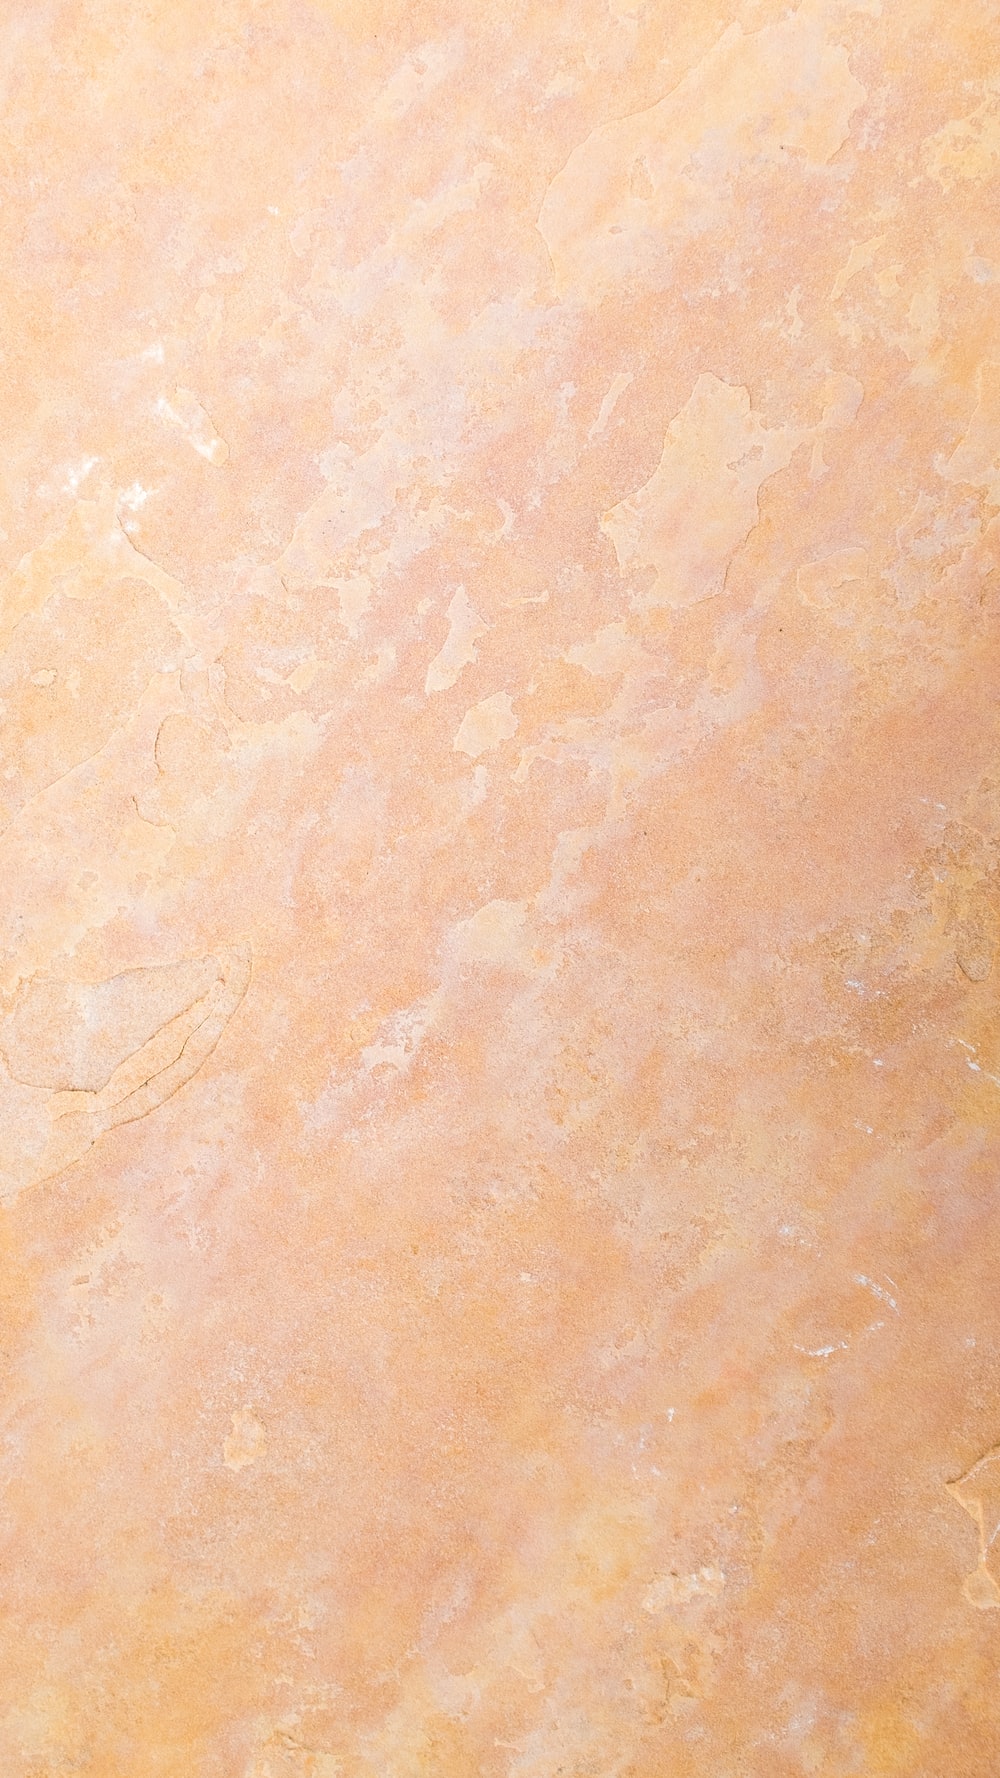 An orange and yellow marble textured background photo